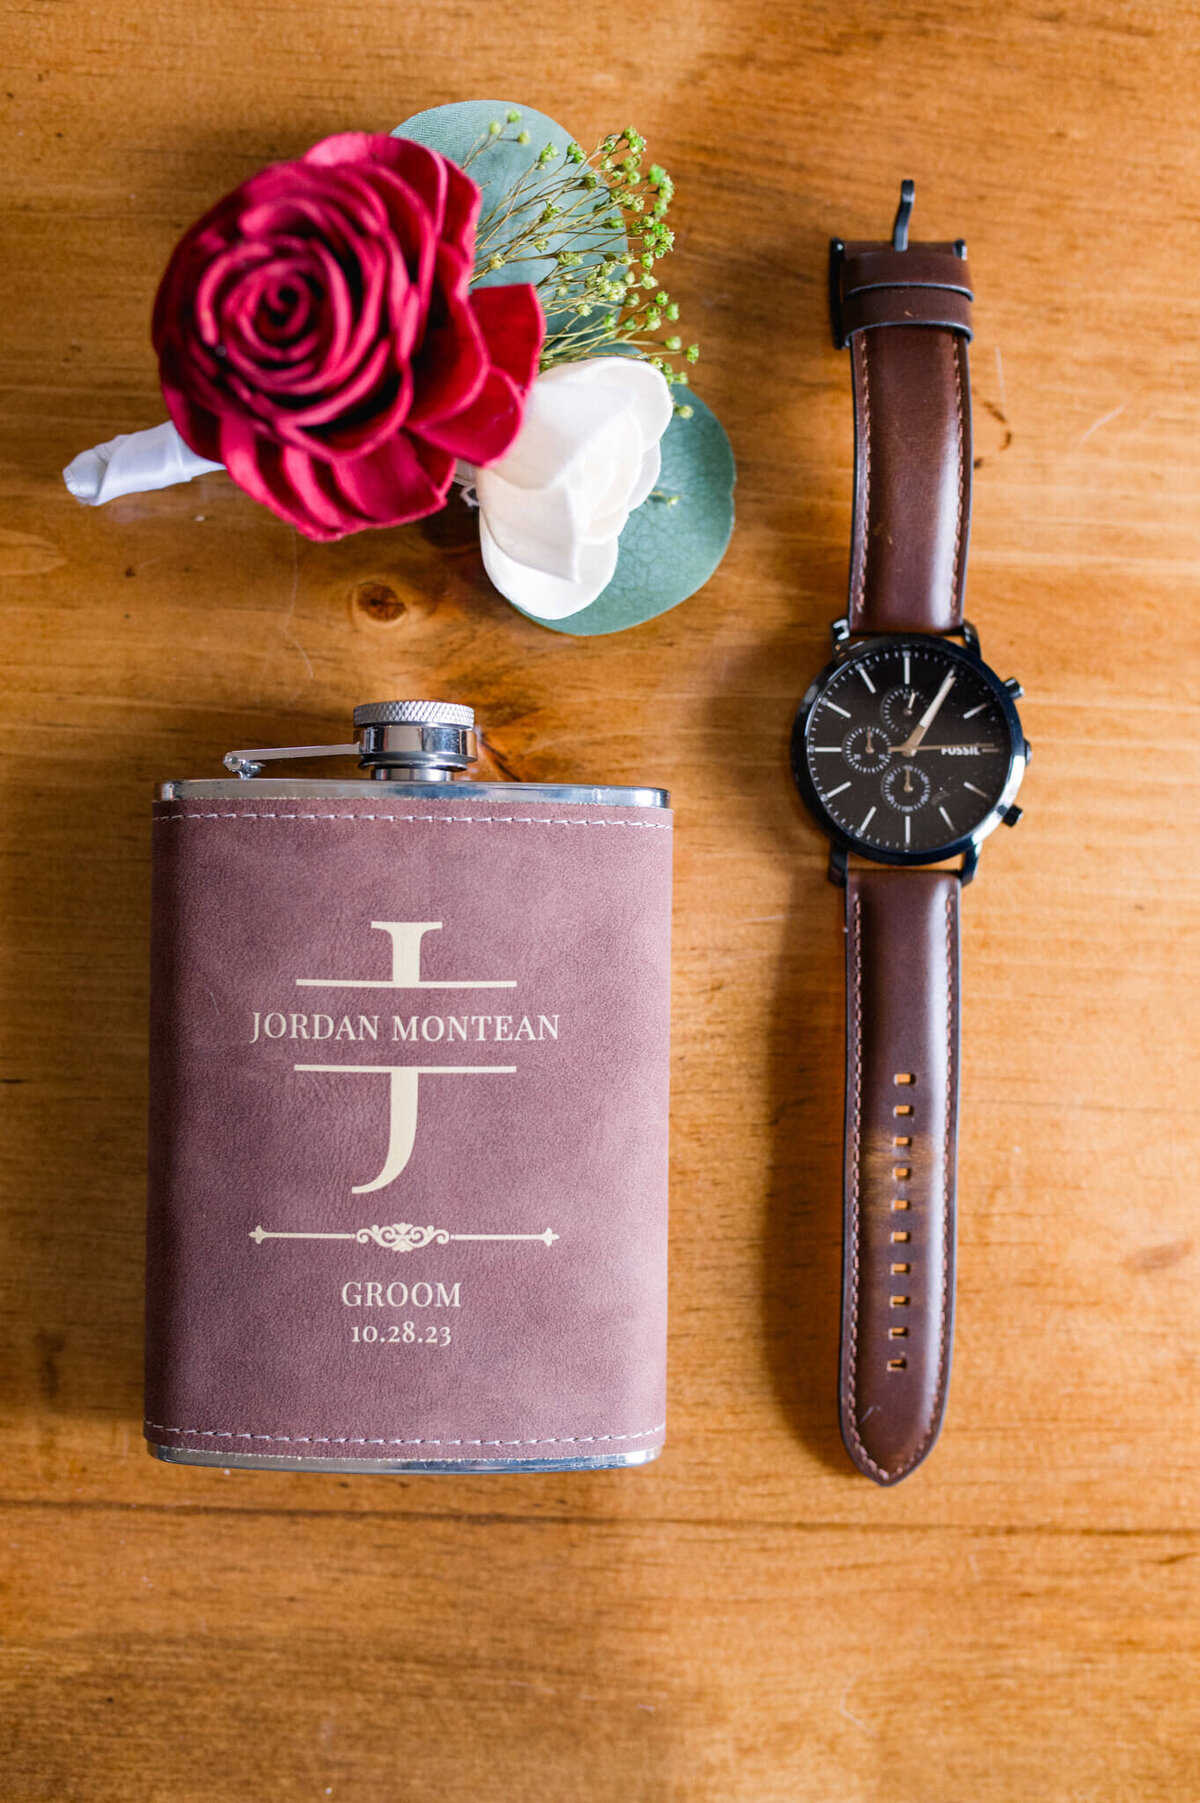 Flask watch and boutineer for grooms getting ready details